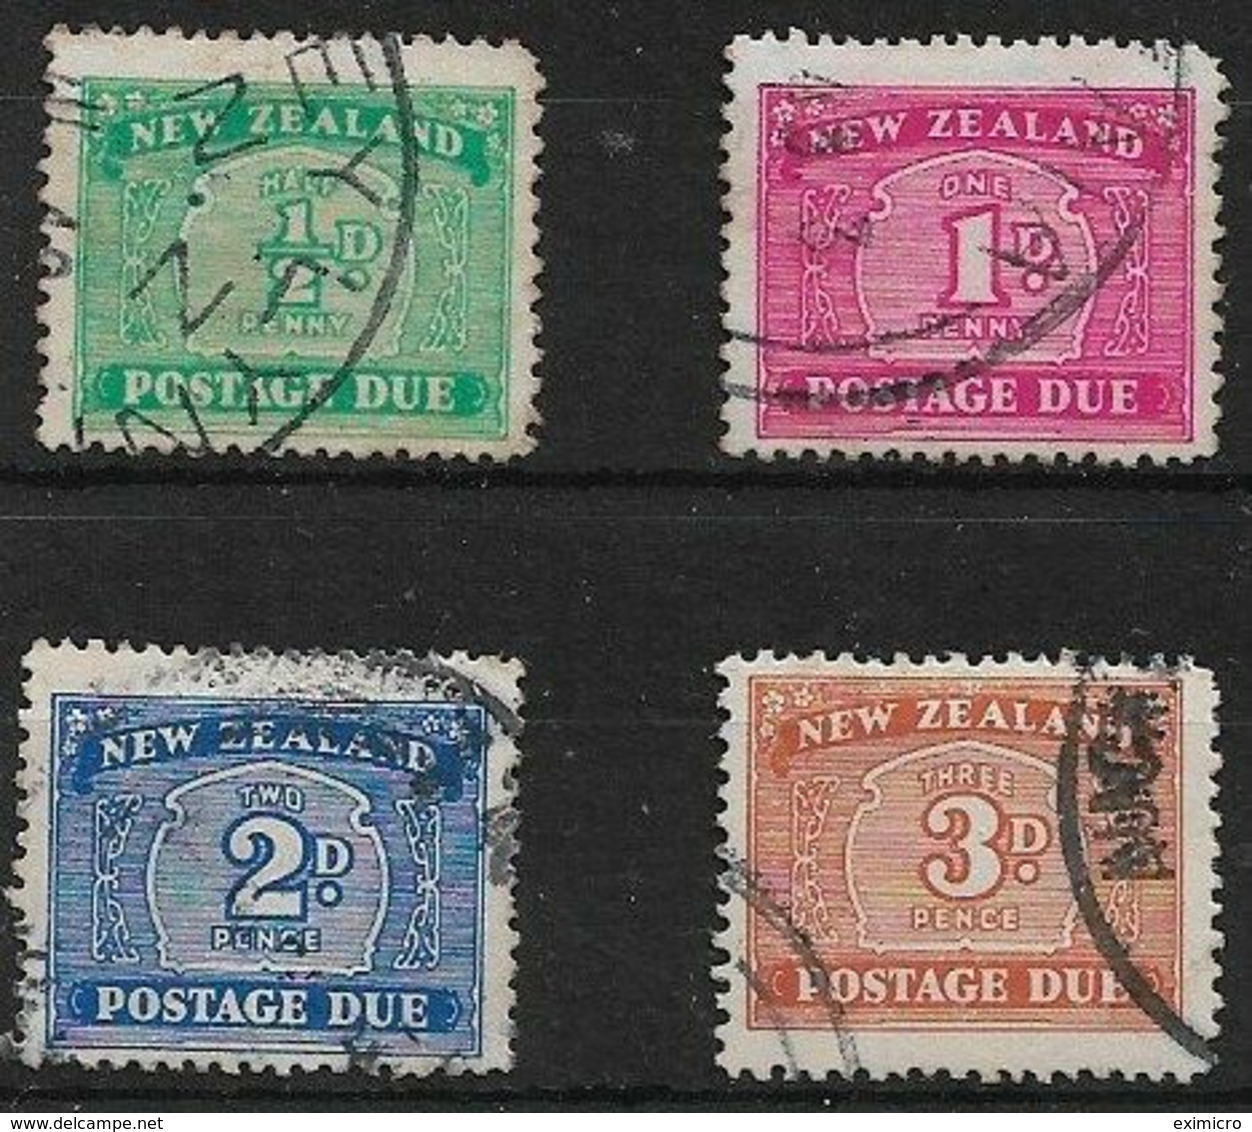 NEW ZEALAND 1939 POSTAGE DUE SET SG D41/44 FINE USED Cat £32 - Timbres-taxe